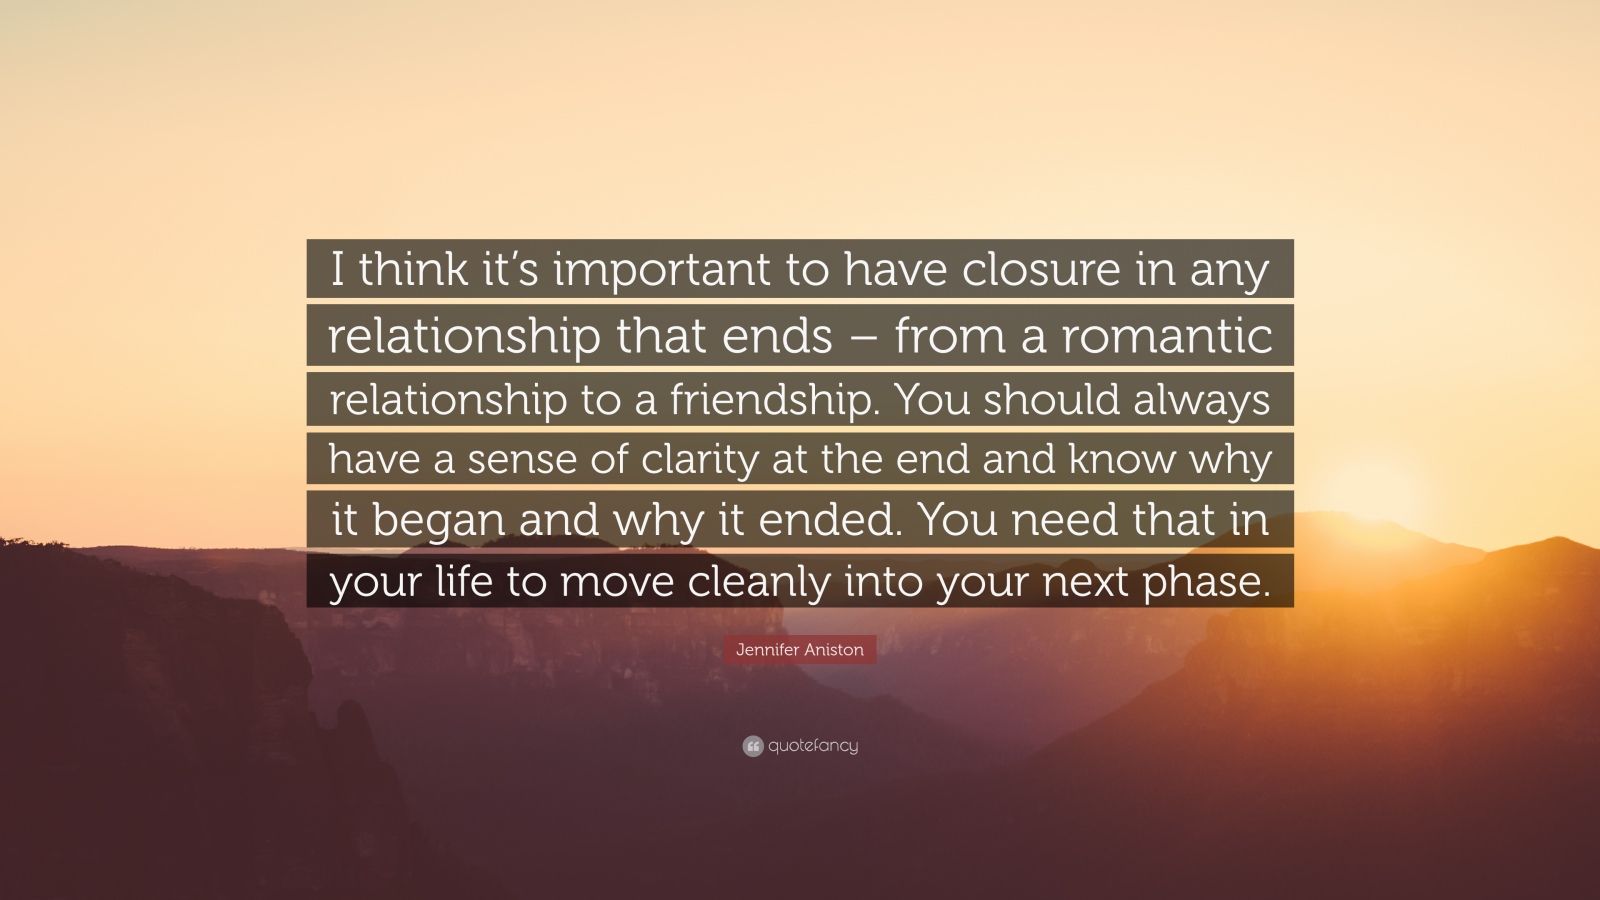 is relationship closure important